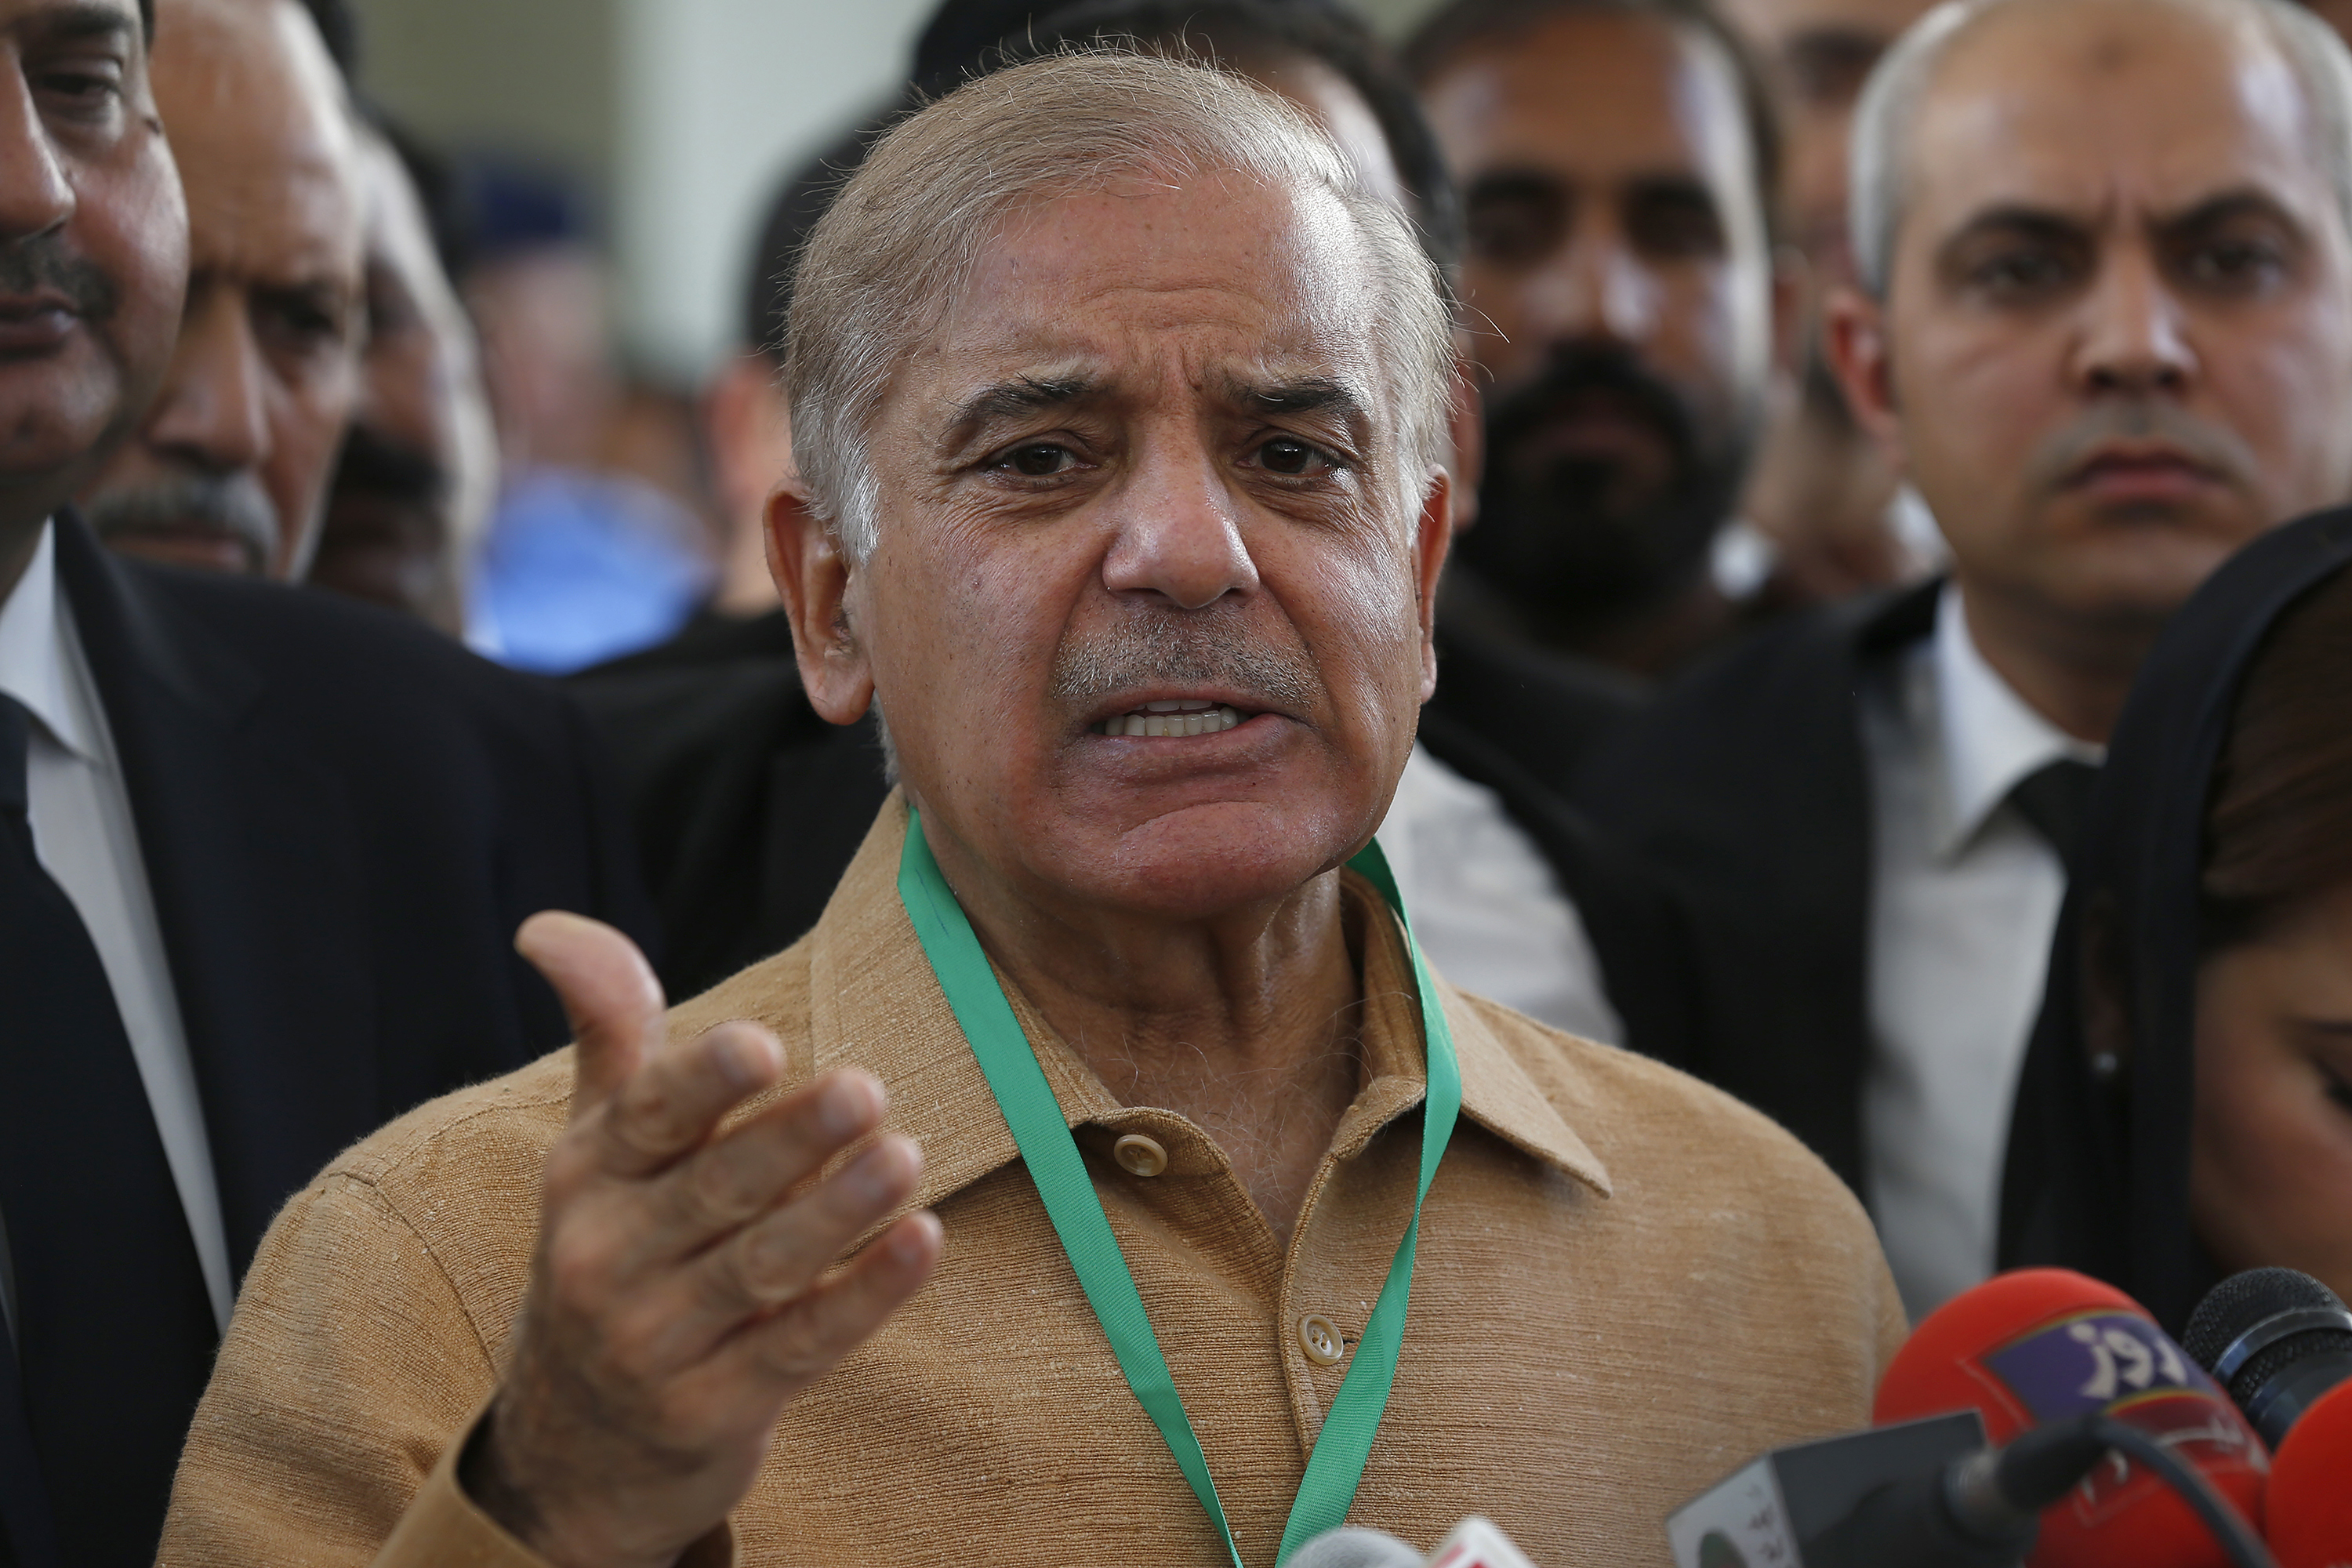 Pakistan’s Prime Minister Shehbaz Sharif extended his condolences in a tweet on Wednesday.